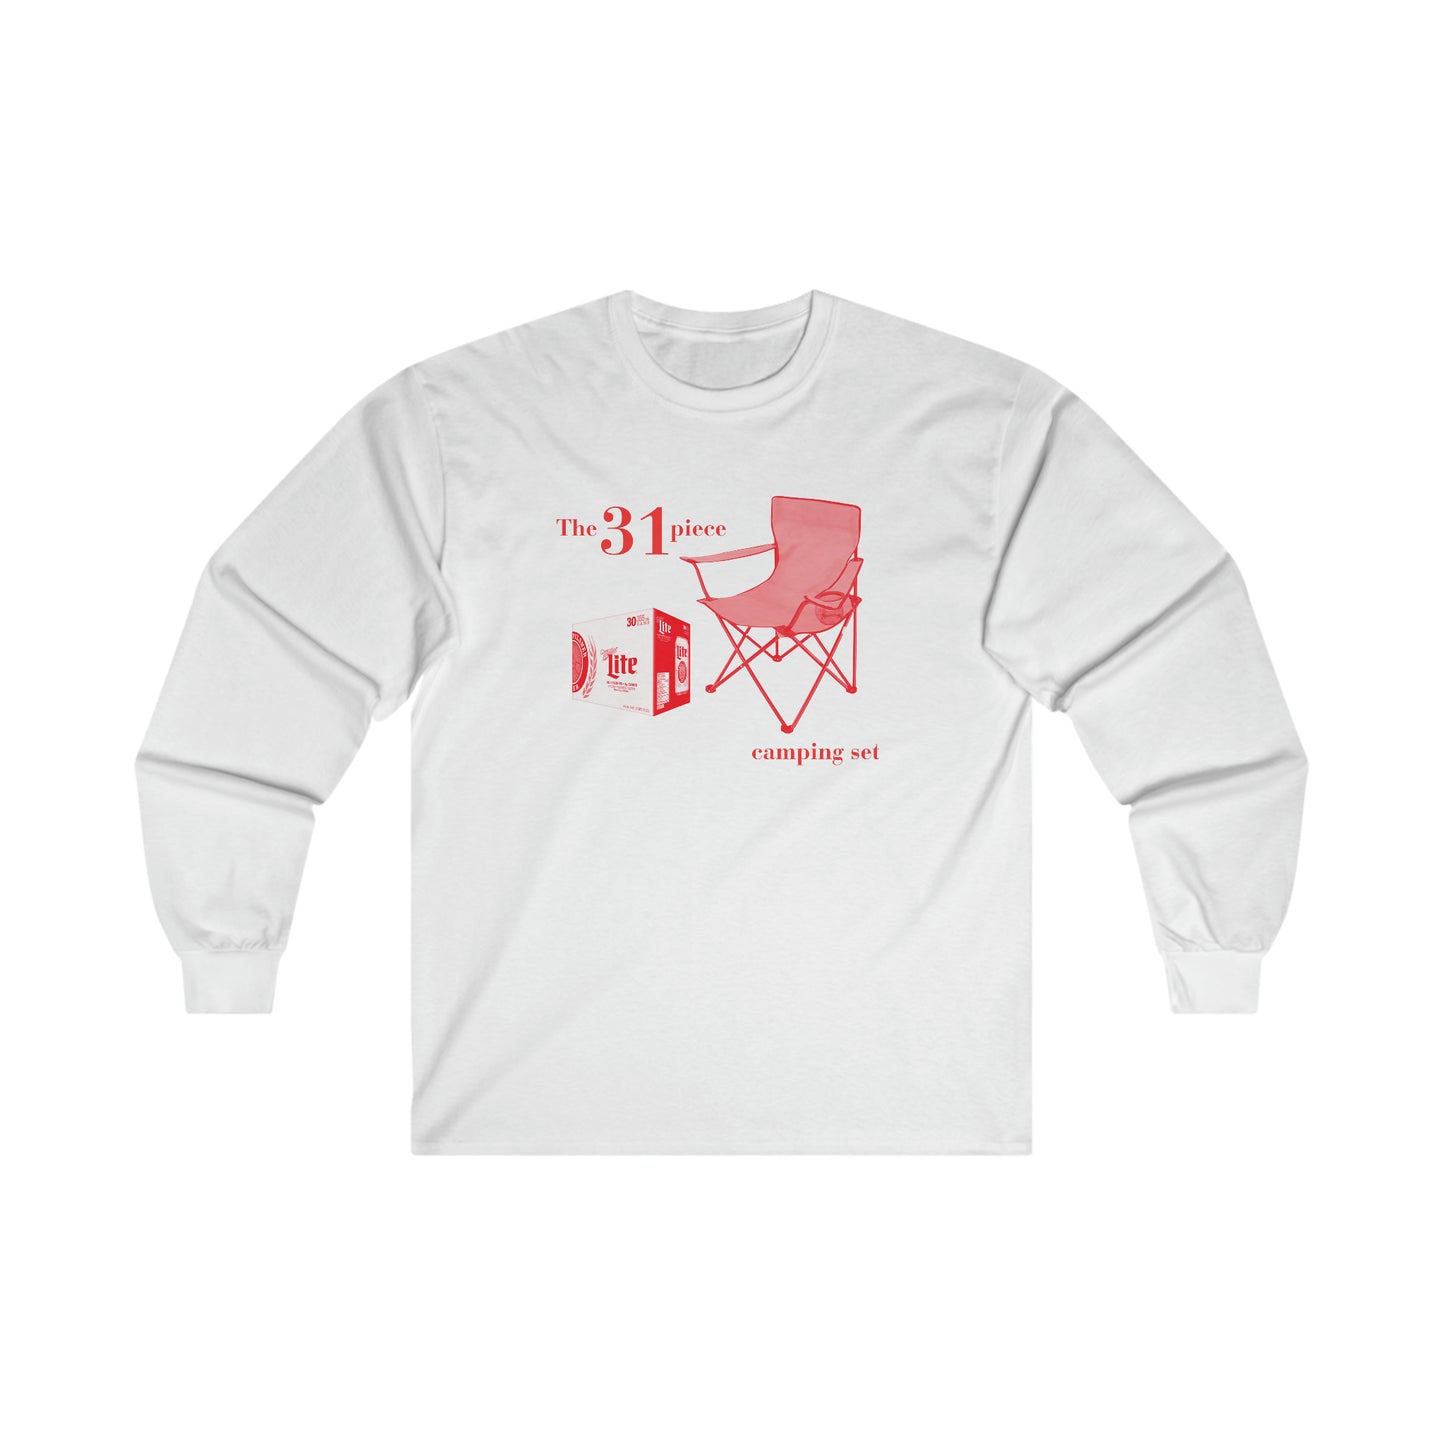 The 31 piece camping set - Ultra Cotton Long Sleeve Tee